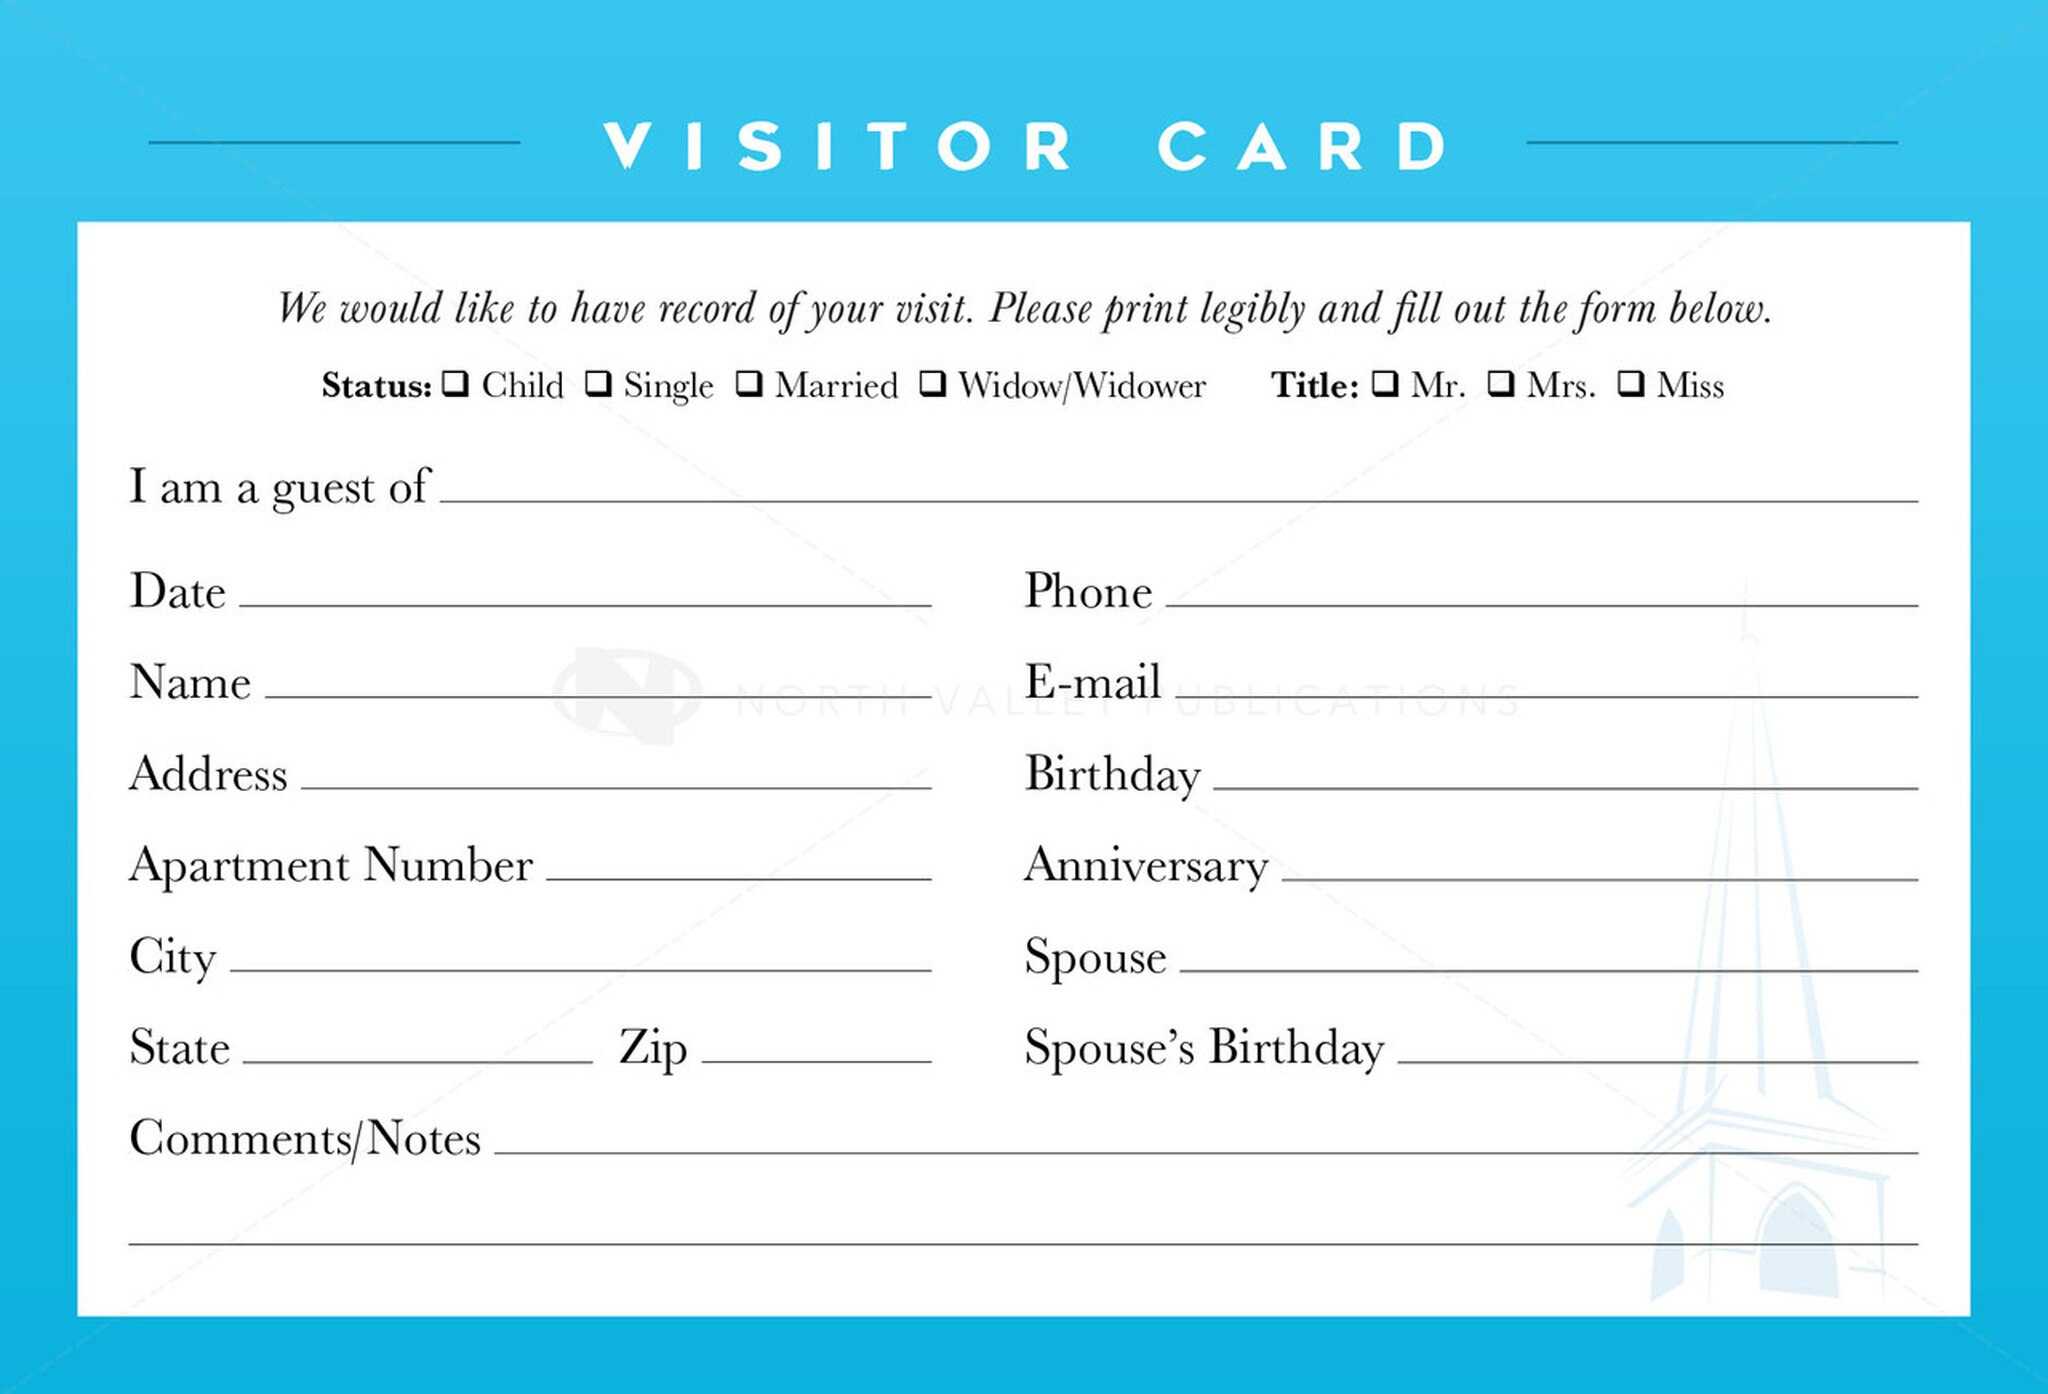 62D2C Guest Card Template | Wiring Library Inside Church Visitor Card Template